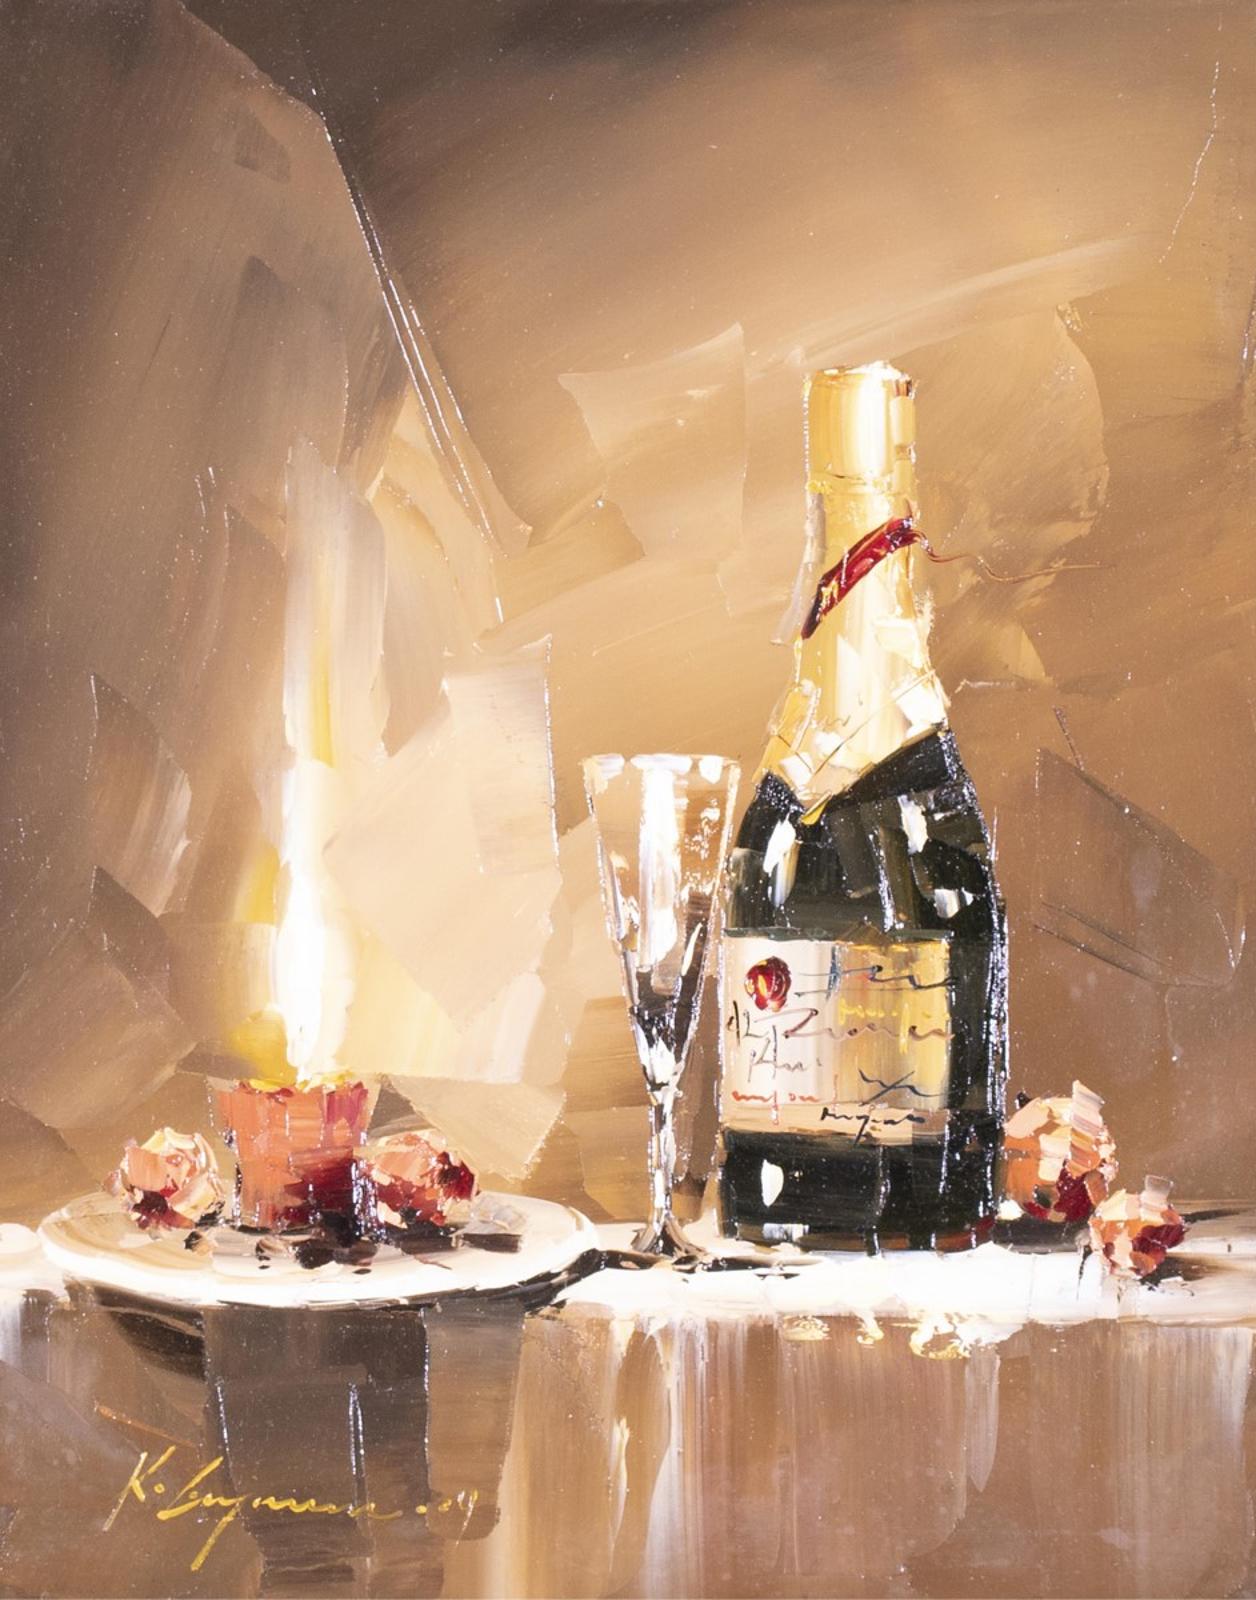 Kal Gajoum (1968) - Still Life With Champagne Bottle, Flute And Candle; 2004